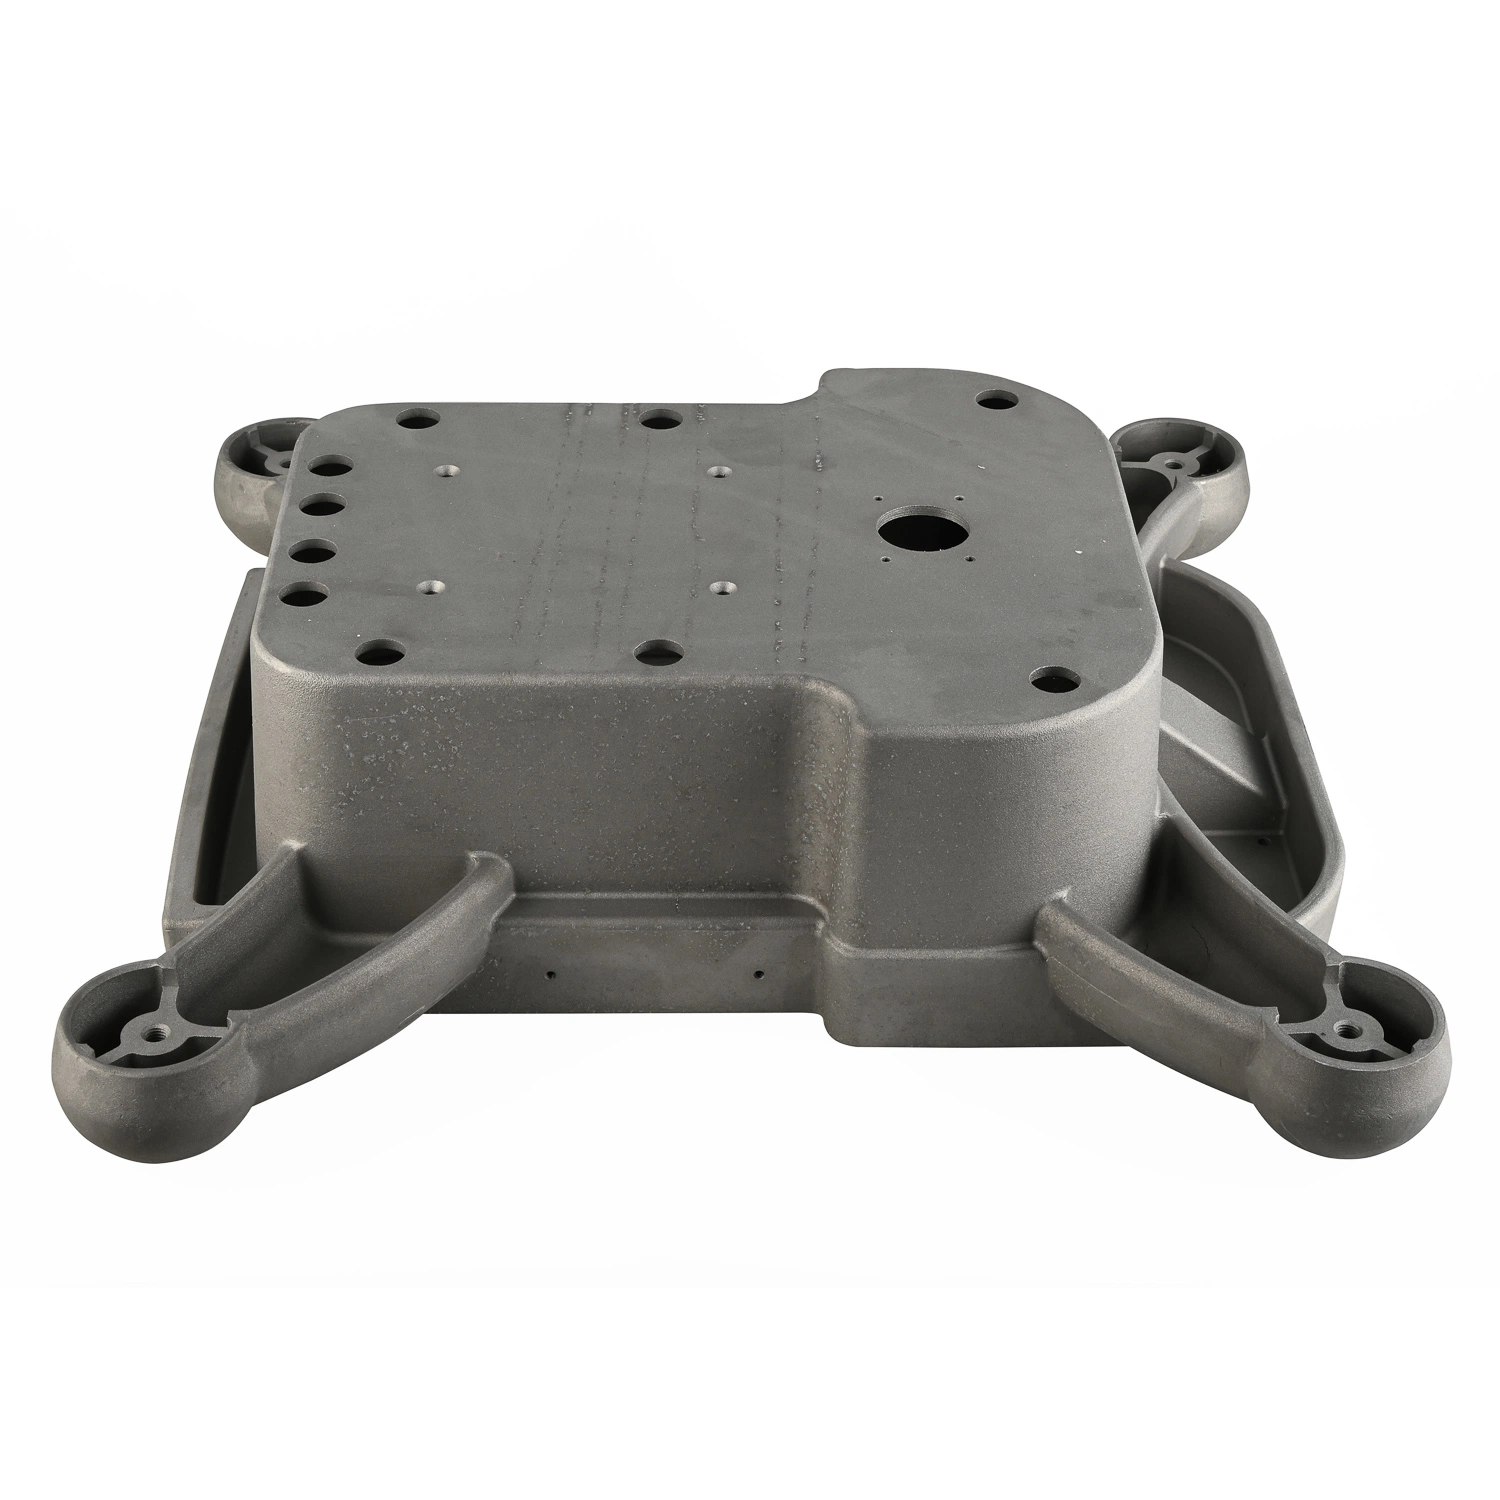 Customized ODM Factory Aluminum CNC Machining Gravity Casting Low Pressure Casting Die Casting for Engineering Parts Uav Vehicle Parts